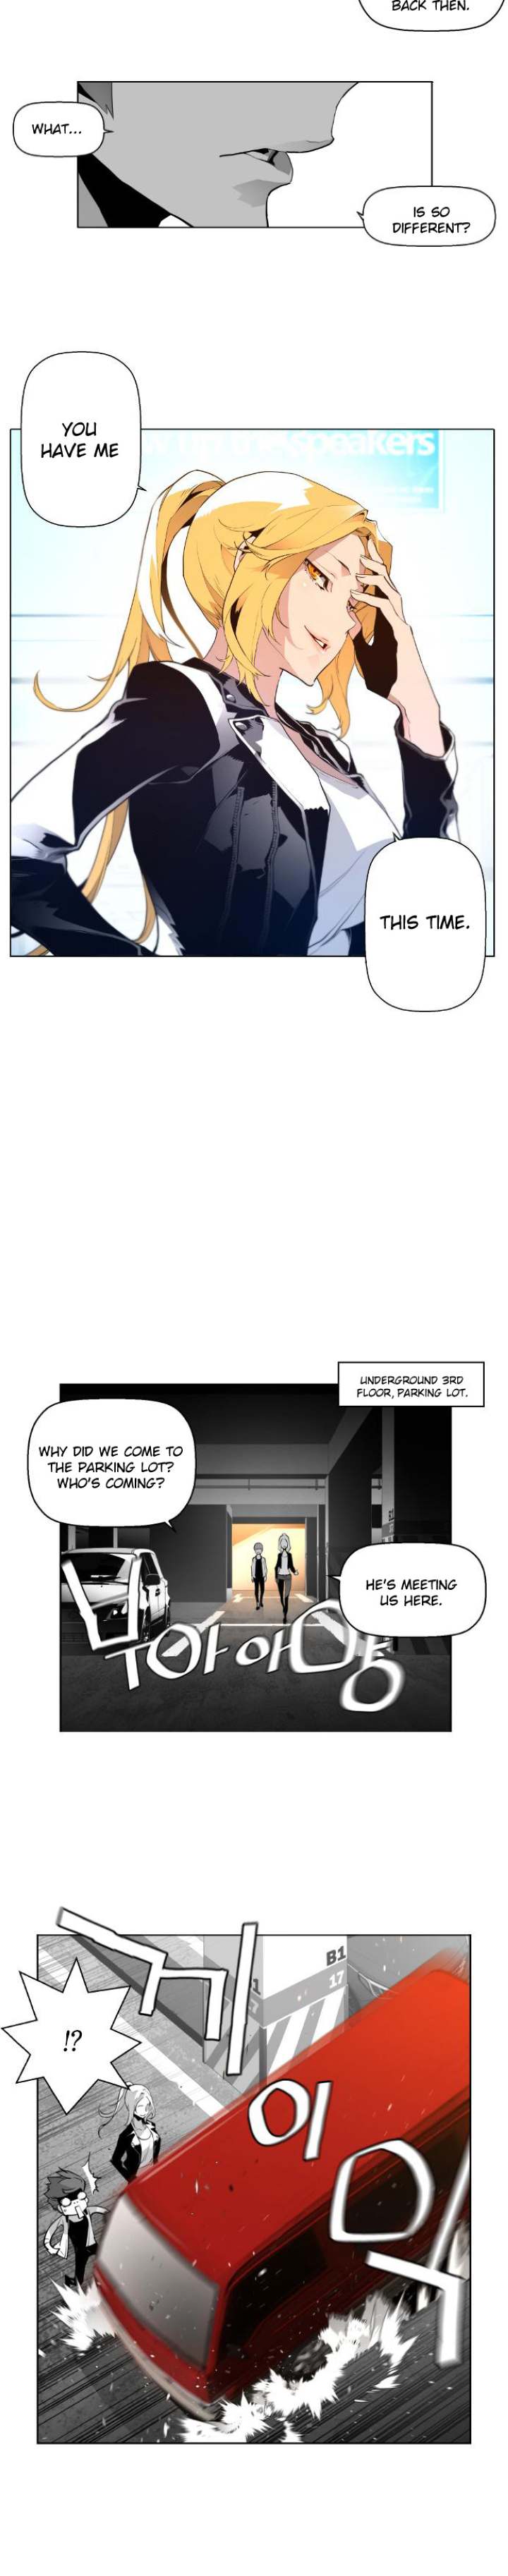 Terror Man - Chapter 1 Page 24